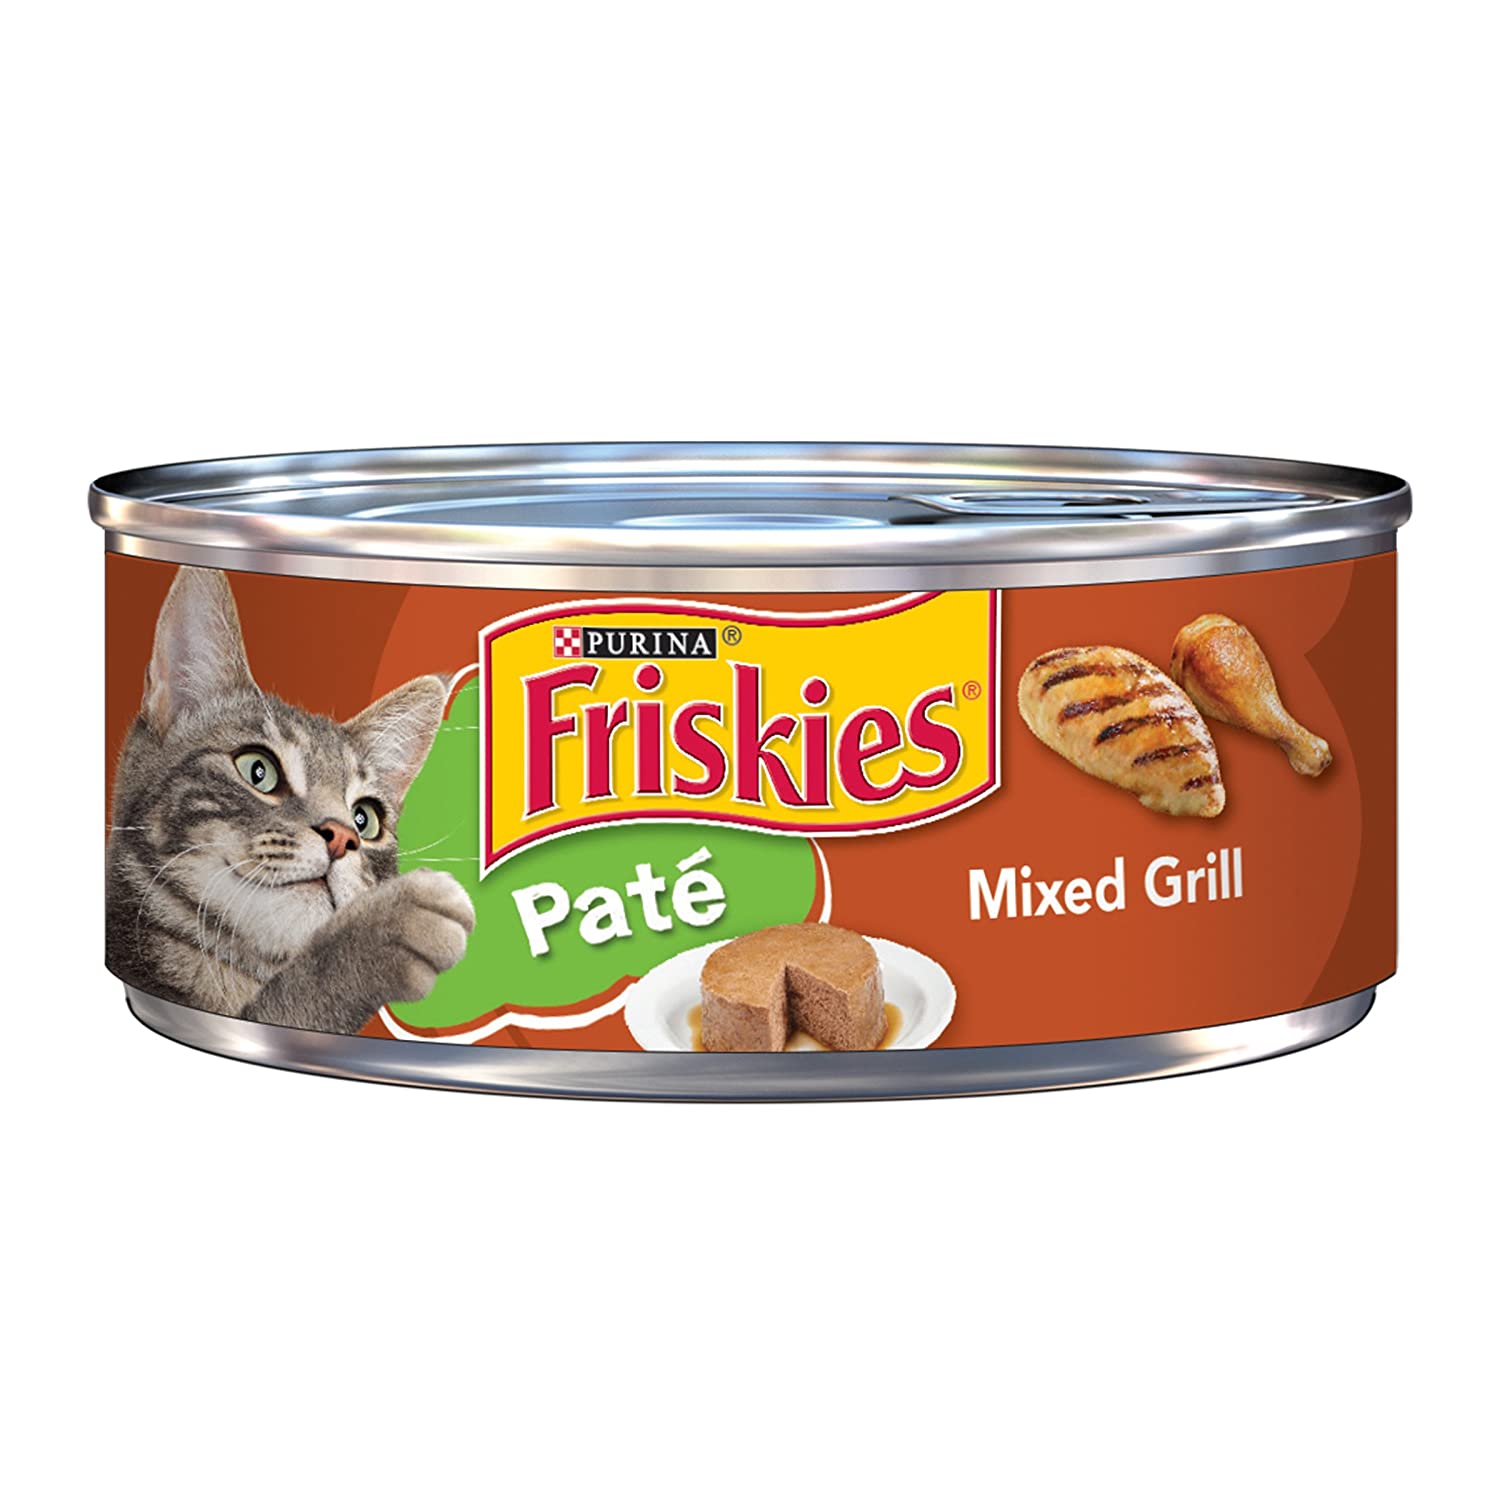 How Much Friskies Wet Food To Feed A Cat